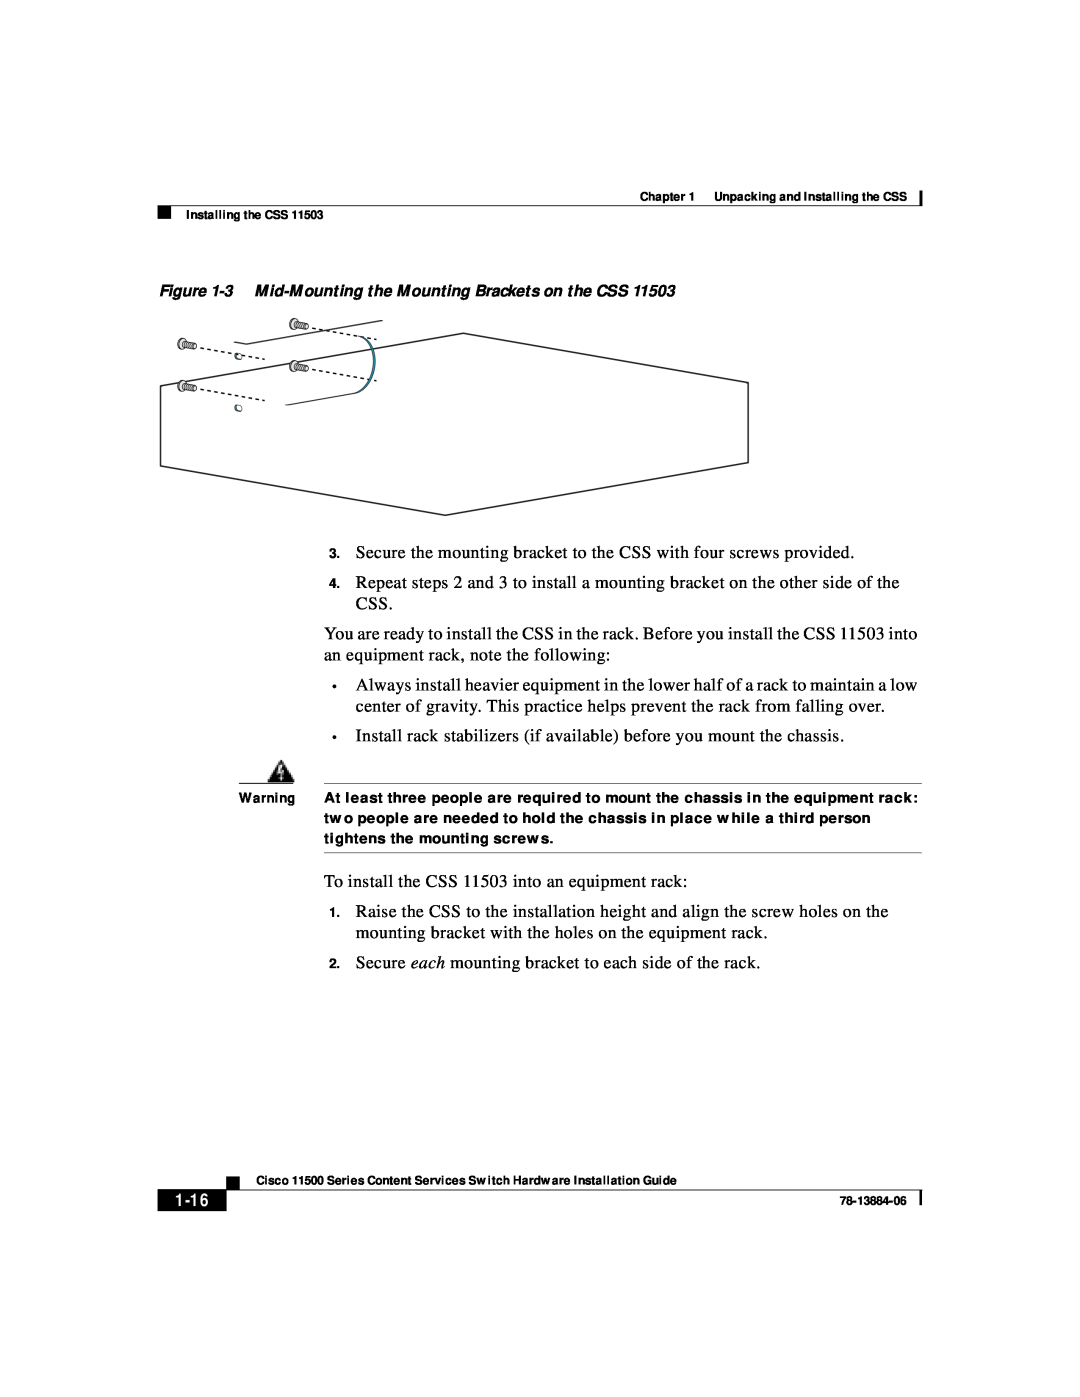 Cisco Systems 11500 Series manual 1-16, 3 Mid-Mounting the Mounting Brackets on the CSS, Console 